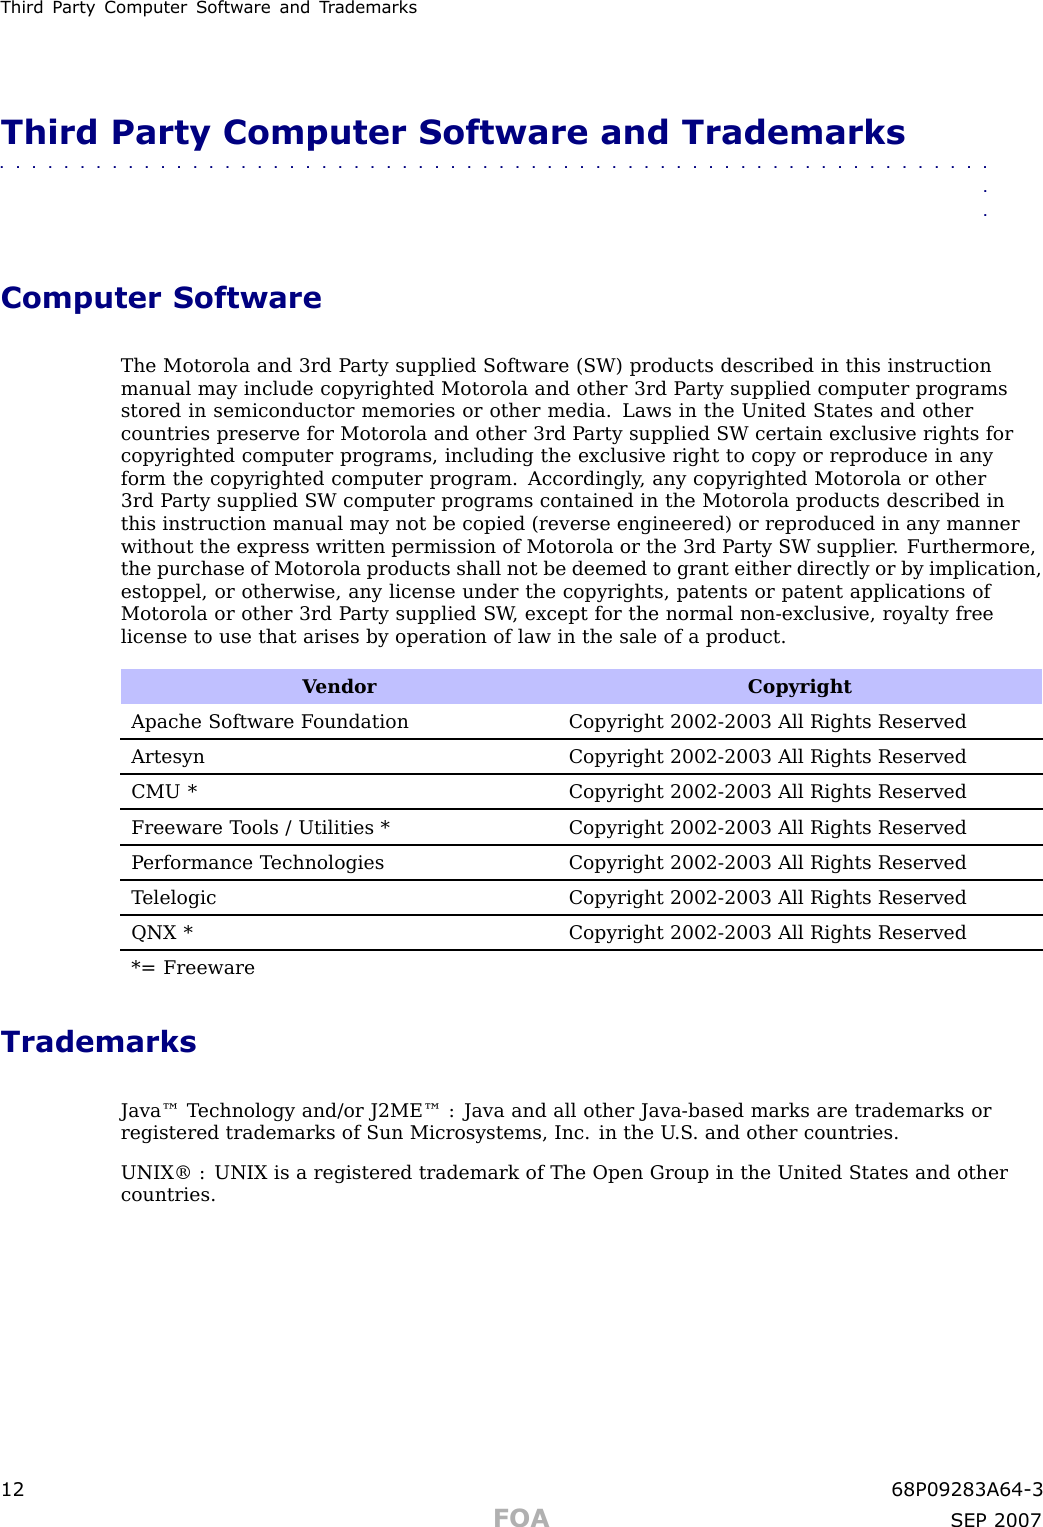 Third P art y Computer Softw are and T r ademarksThird Party Computer Software and Trademarks■■■■■■■■■■■■■■■■■■■■■■■■■■■■■■■■■■■■■■■■■■■■■■■■■■■■■■■■■■■■■■■■Computer SoftwareThe Motorola and 3rd P arty supplied Software (SW) products described in this instructionmanual may include copyrighted Motorola and other 3rd P arty supplied computer programsstored in semiconductor memories or other media. Laws in the United States and othercountries preserve for Motorola and other 3rd P arty supplied SW certain exclusive rights forcopyrighted computer programs, including the exclusive right to copy or reproduce in anyform the copyrighted computer program. Accordingly , any copyrighted Motorola or other3rd P arty supplied SW computer programs contained in the Motorola products described inthis instruction manual may not be copied (reverse engineered) or reproduced in any mannerwithout the express written permission of Motorola or the 3rd P arty SW supplier . Furthermore,the purchase of Motorola products shall not be deemed to grant either directly or by implication,estoppel, or otherwise, any license under the copyrights, patents or patent applications ofMotorola or other 3rd P arty supplied SW , except for the normal non -exclusive, royalty freelicense to use that arises by operation of law in the sale of a product.V endor CopyrightApache Software F oundation Copyright 2002-2003 All Rights ReservedArtesynCopyright 2002-2003 All Rights ReservedCMU *Copyright 2002-2003 All Rights ReservedFreeware T ools / Utilities * Copyright 2002-2003 All Rights ReservedP erformance T echnologies Copyright 2002-2003 All Rights ReservedT elelogic Copyright 2002-2003 All Rights ReservedQNX *Copyright 2002-2003 All Rights Reserved*= FreewareTrademarksJava™ T echnology and/or J2ME™ : Java and all other Java -based marks are trademarks orregistered trademarks of Sun Microsystems, Inc. in the U .S . and other countries.UNIX® : UNIX is a registered trademark of The Open Group in the United States and othercountries.12 68P09283A64 -3FOA SEP 2007